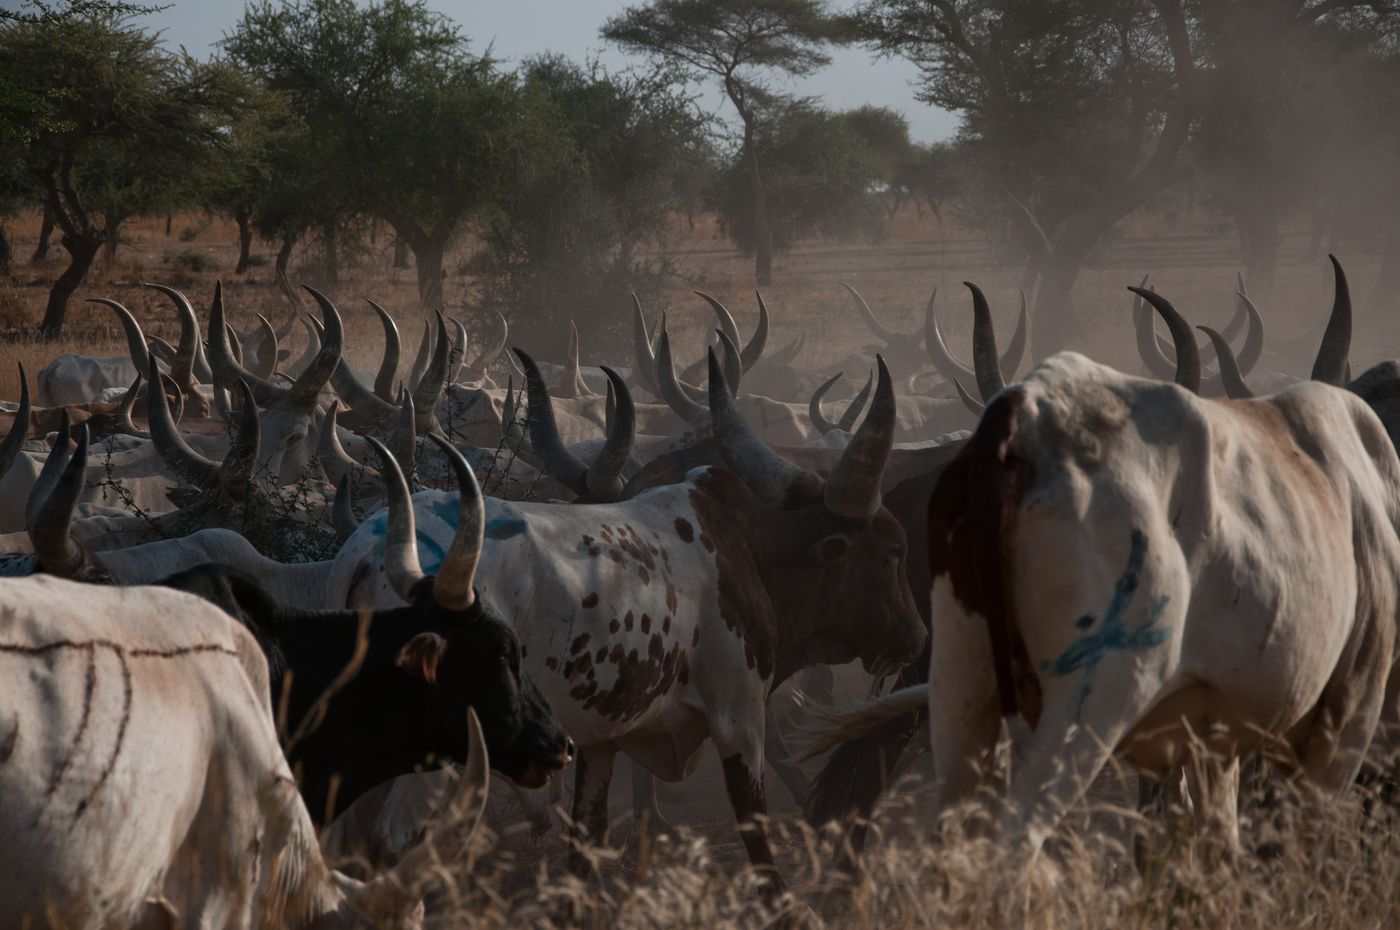 Cattle in West African Niger. Herders are mostly members of the Fulani ethnic group who migrated to Ghana from Burkina Faso, Mali and Niger in the early 20th century.